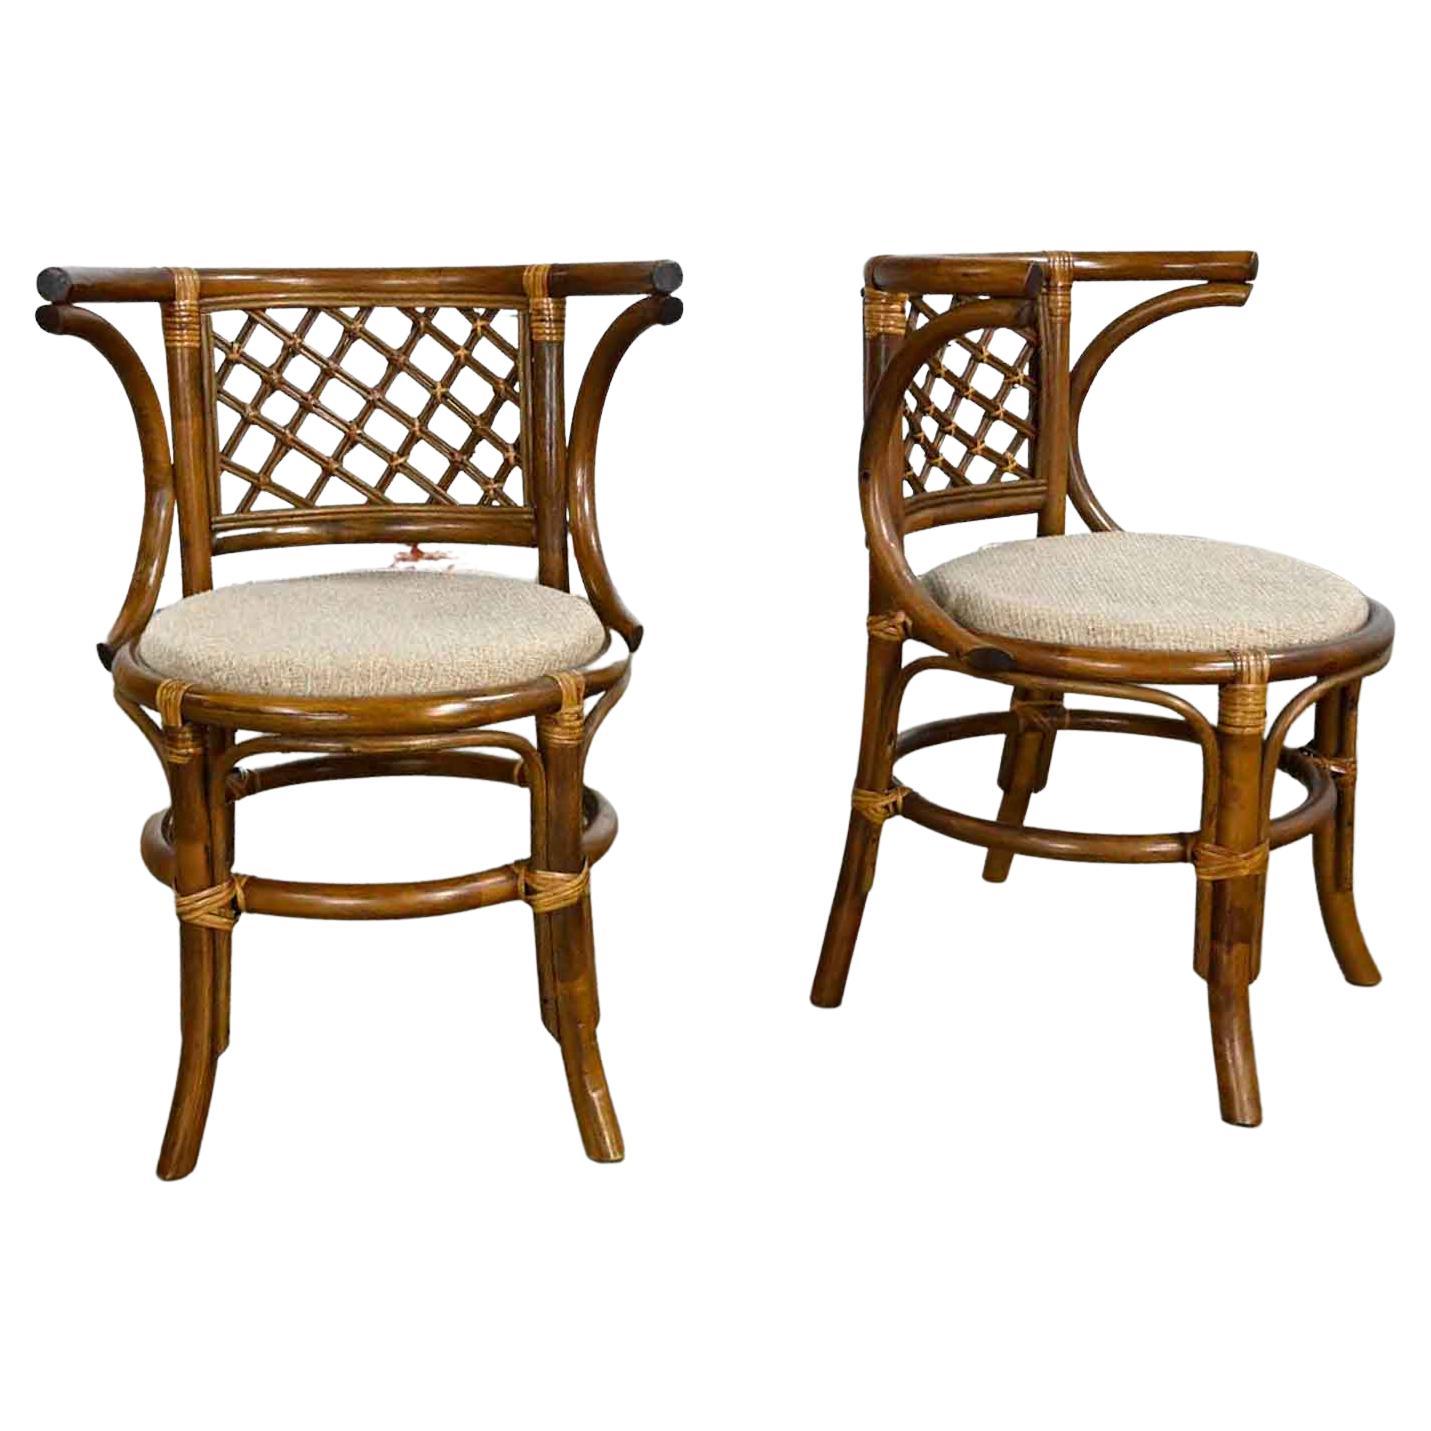 Vintage Rattan & Cane Pair of Side Chairs Woven Diamond Yoke Back Off-White Twee